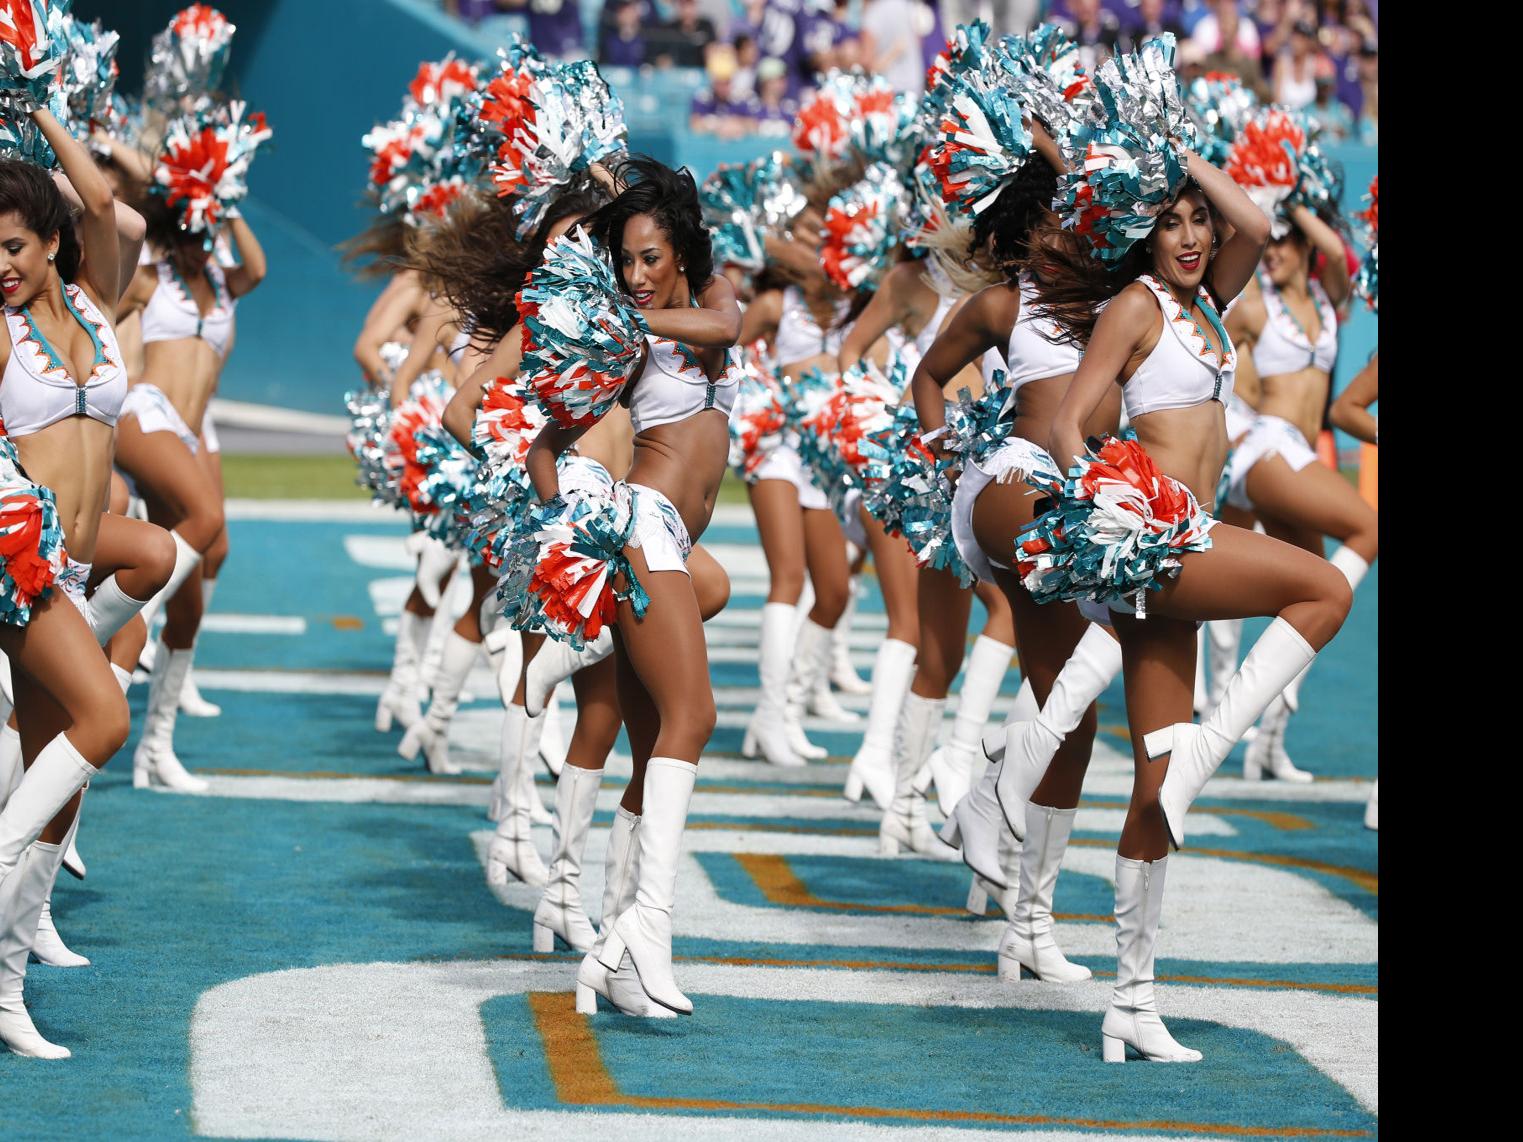 MIAMI DOLPHINS TEAM OF THE WEEK  Miami dolphins cheerleaders